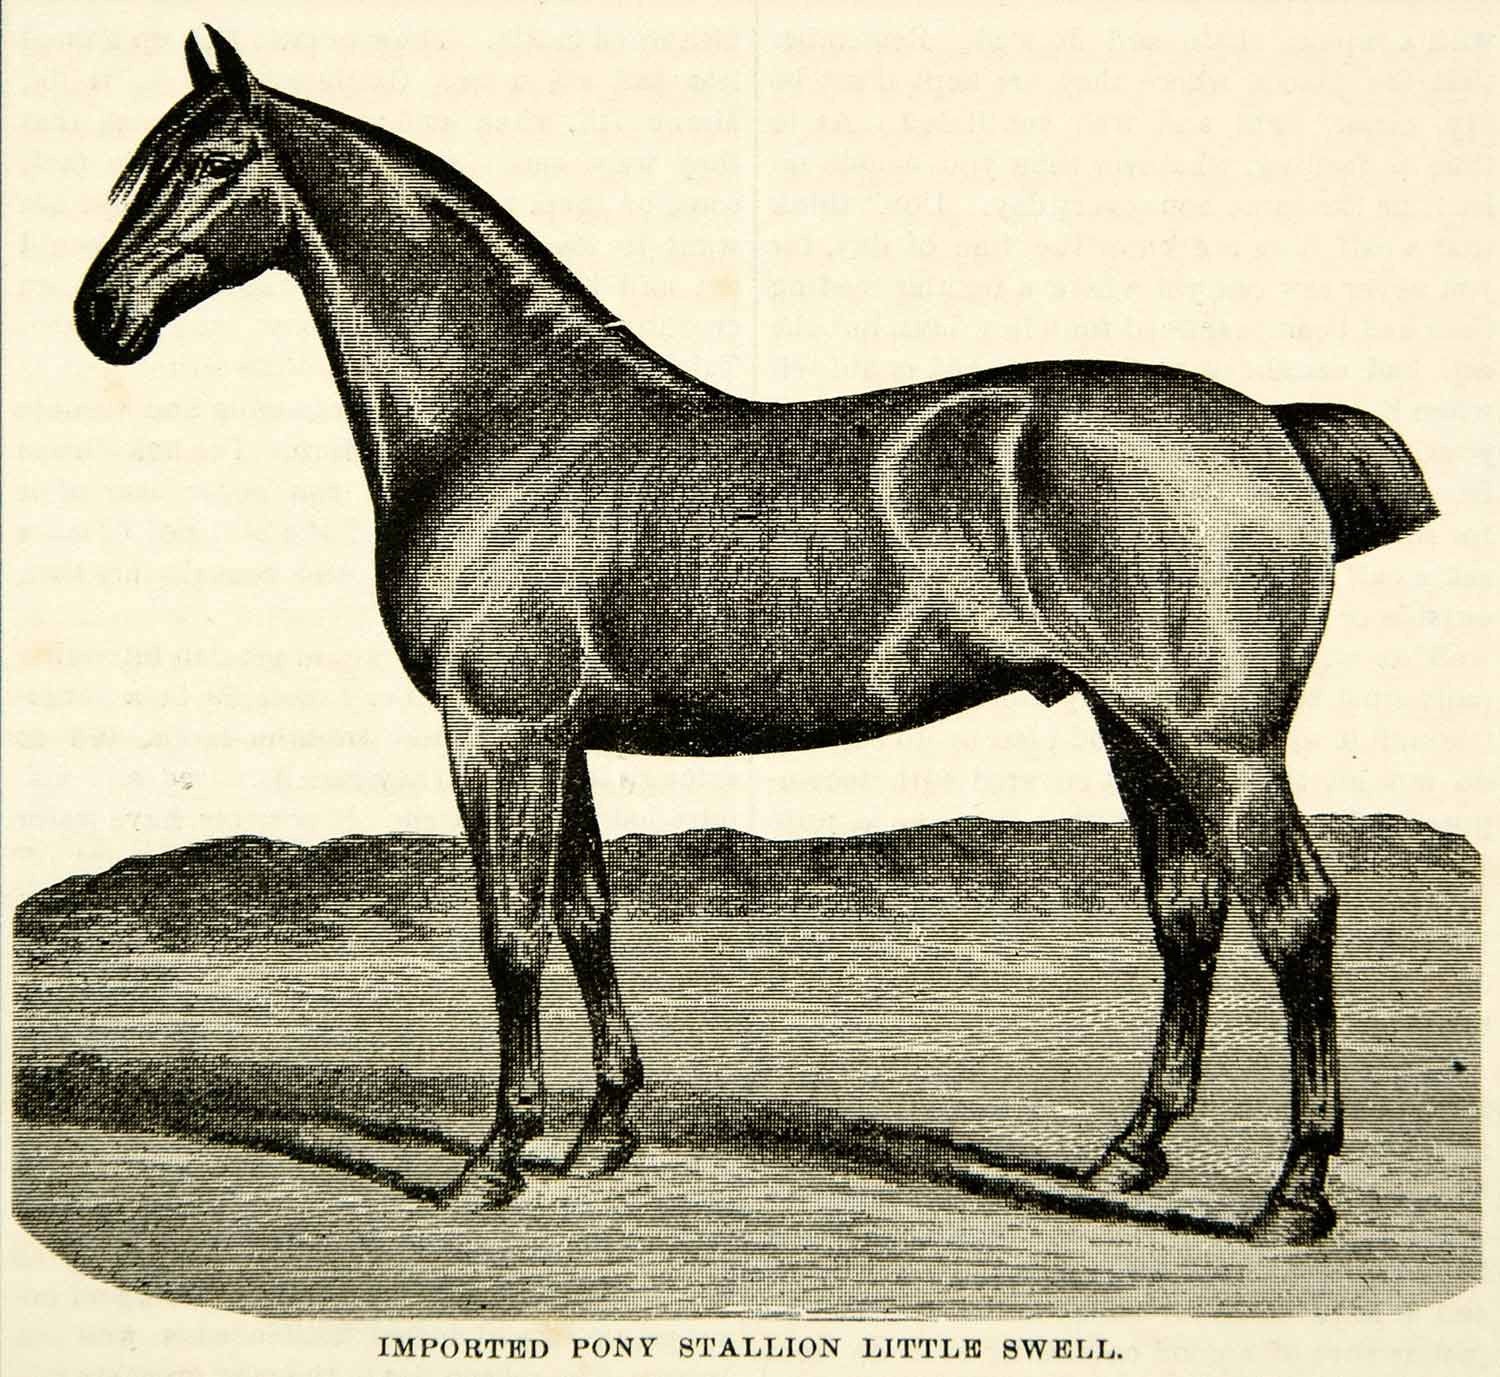 1893 Print Imported Pony Stallion Little Swell Horse Specimen Animal CCG2 - Period Paper
